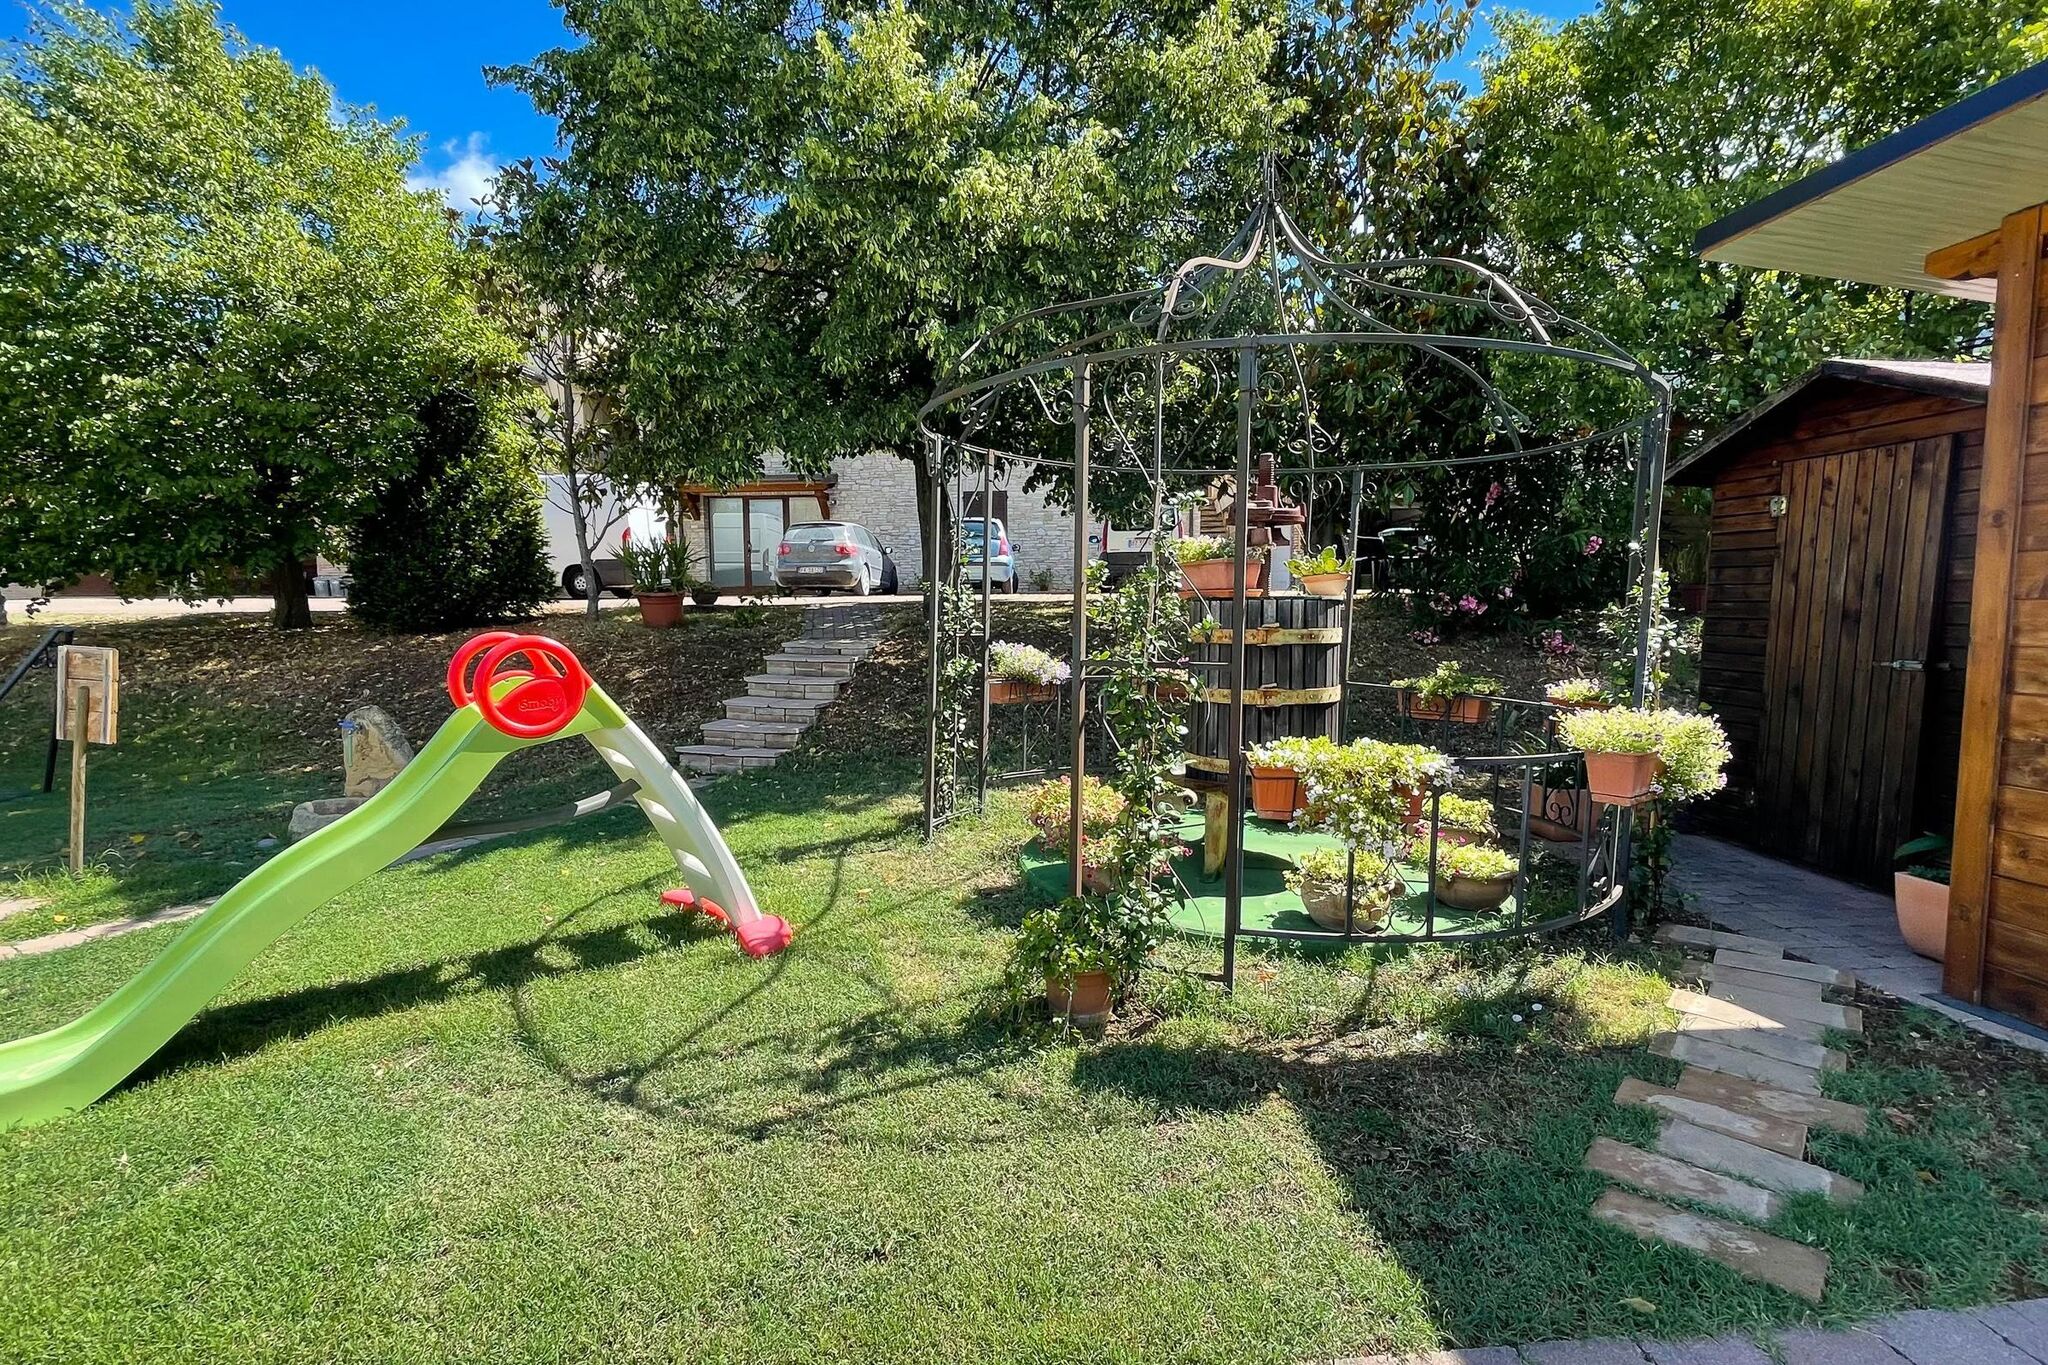 Appealing holiday home in Assisi with garden